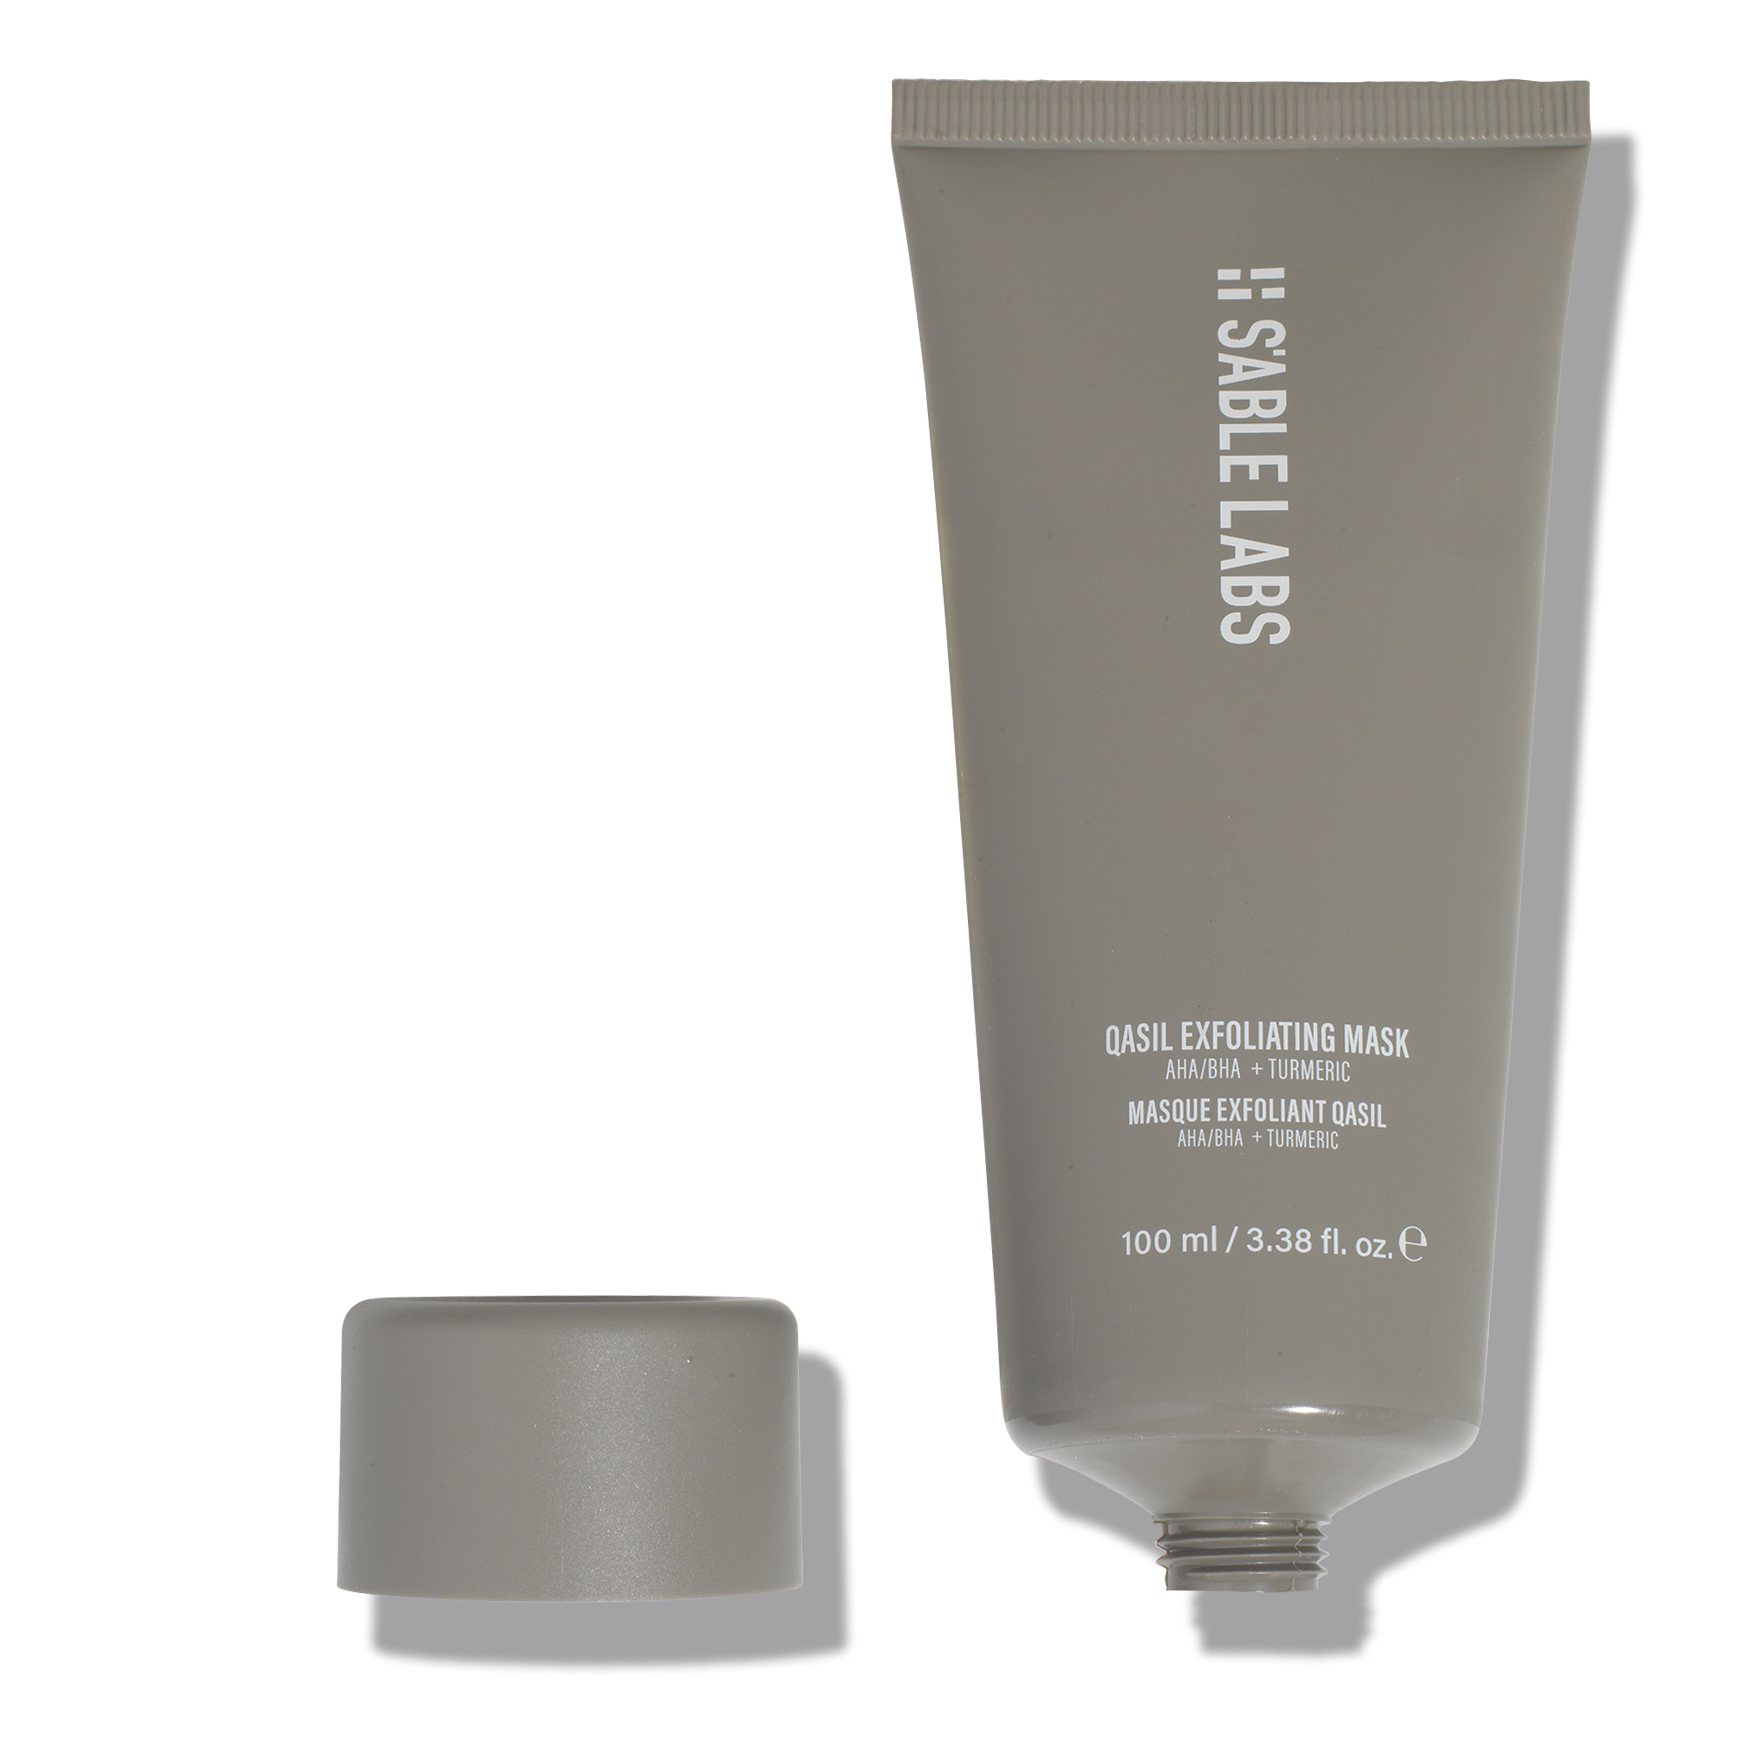 S'ABLE LABS Qasil Exfoliating Mask